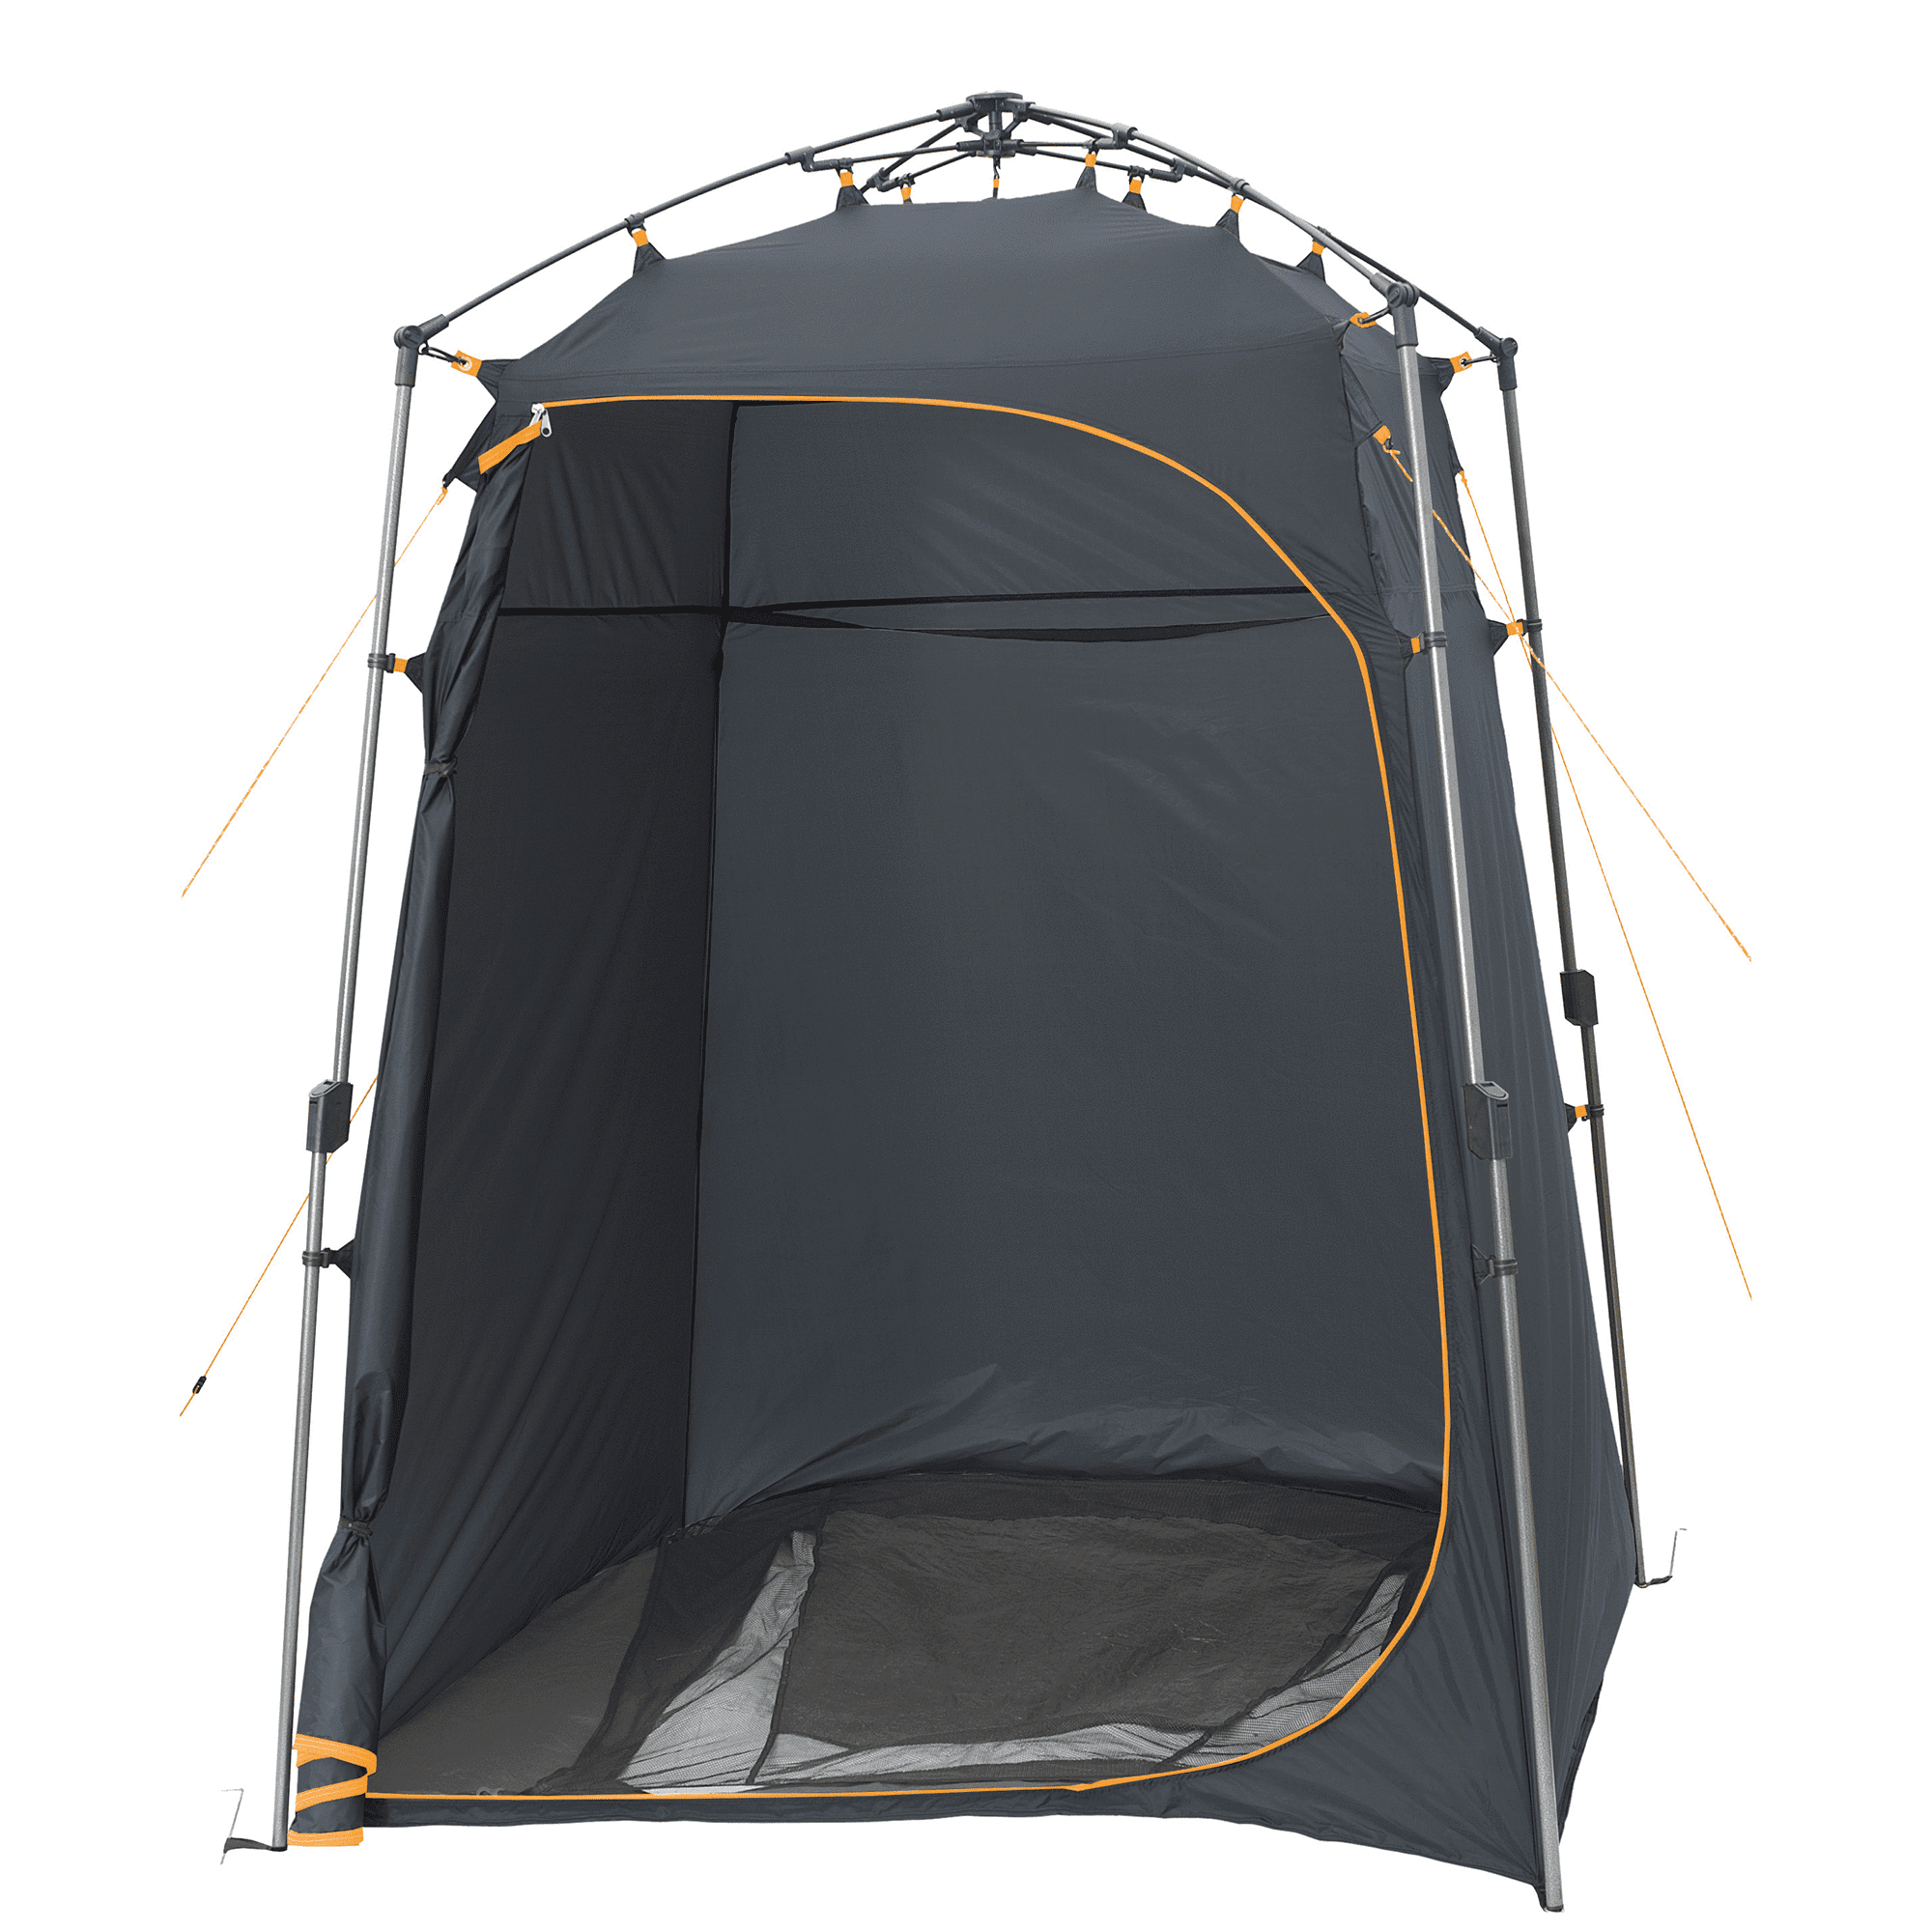 Deluxe Camp Shower Shelter TexSport 